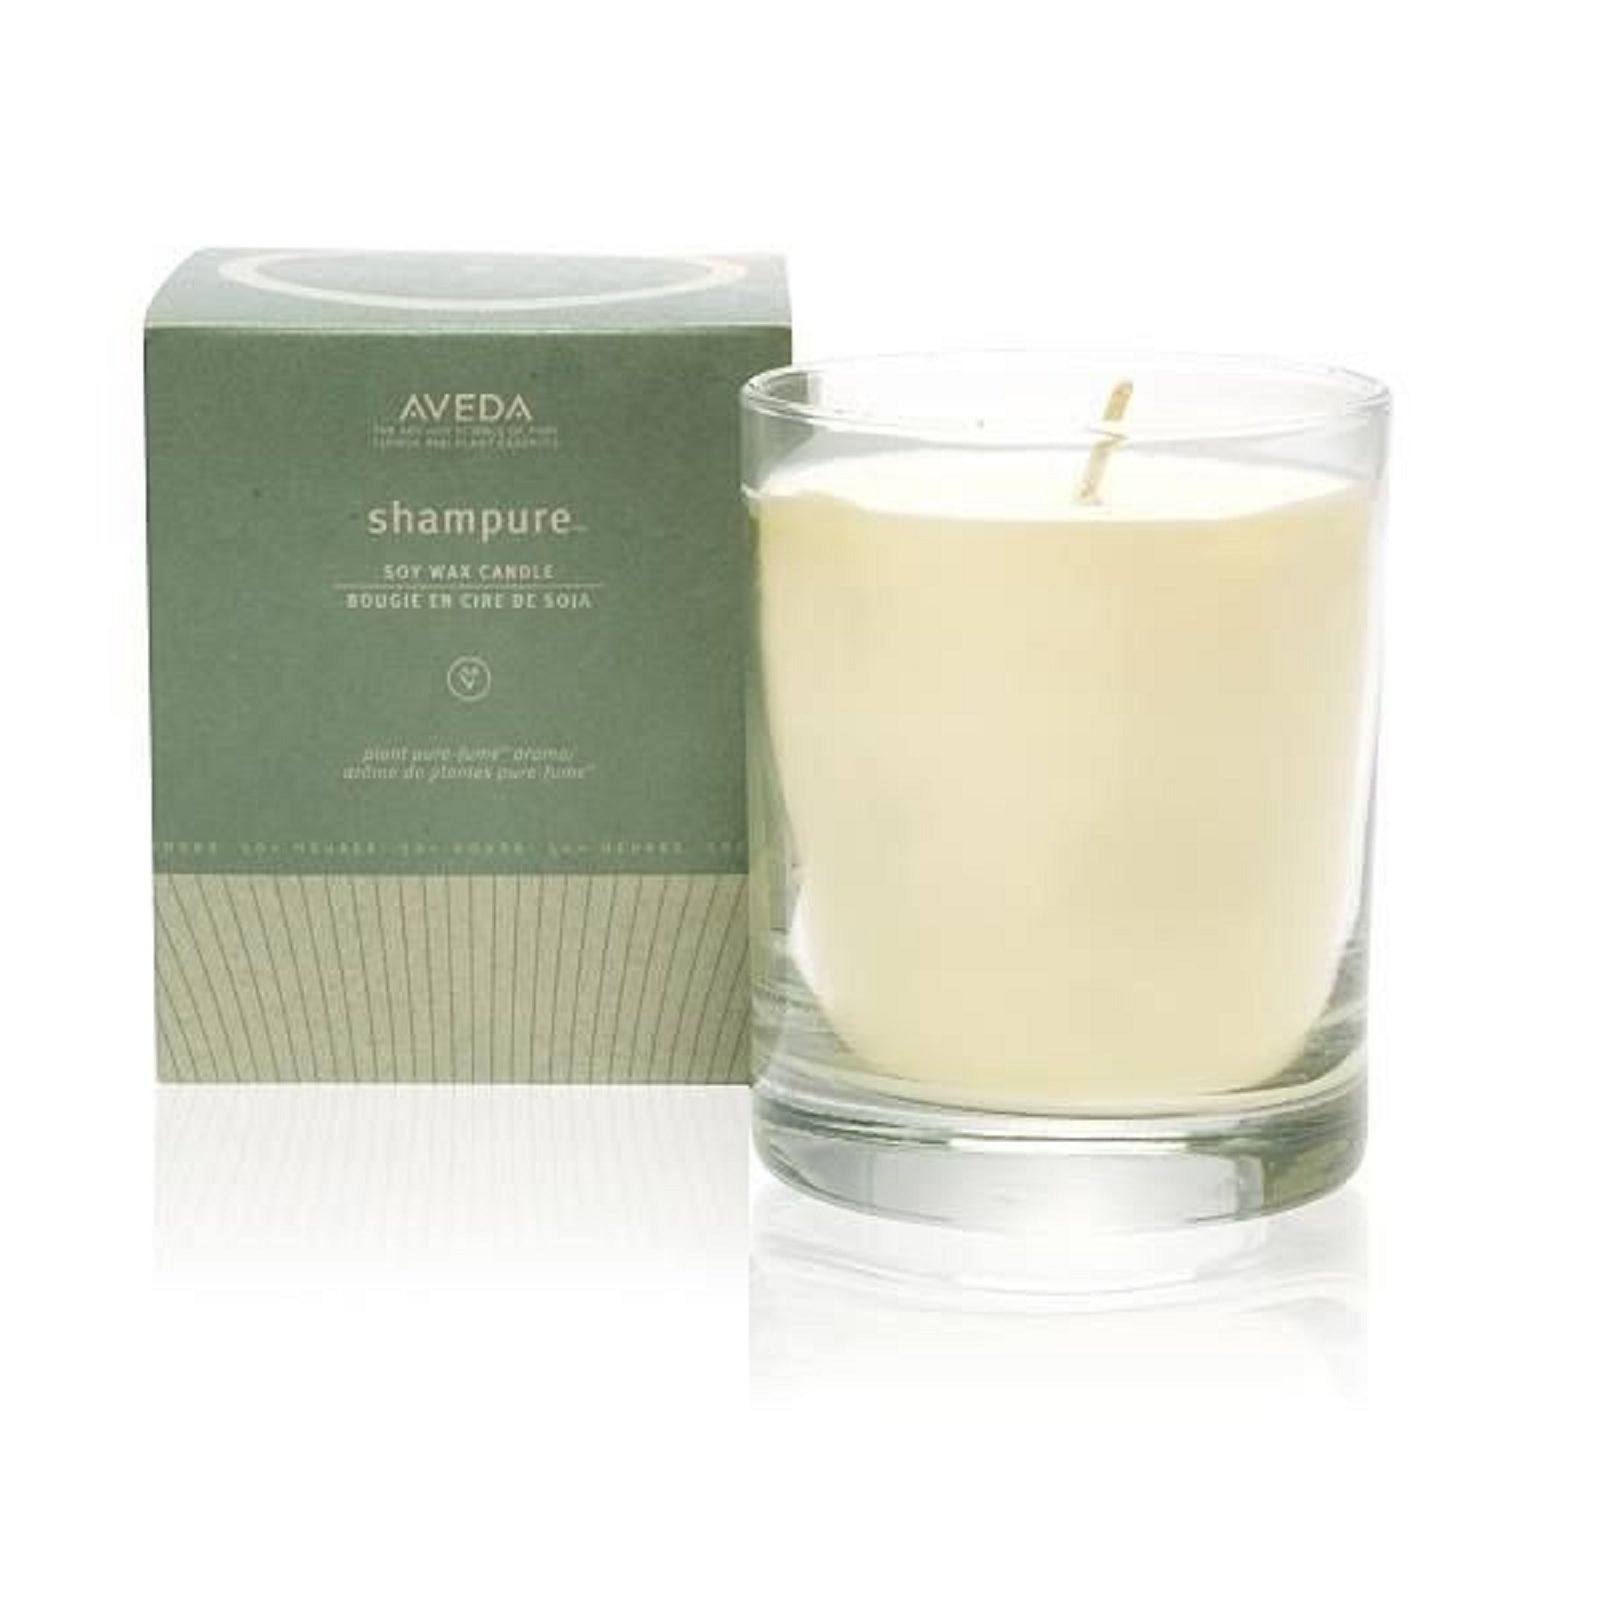 AVEDA Shampure Candle Soy Wax 275g 9.7oz 50 hours